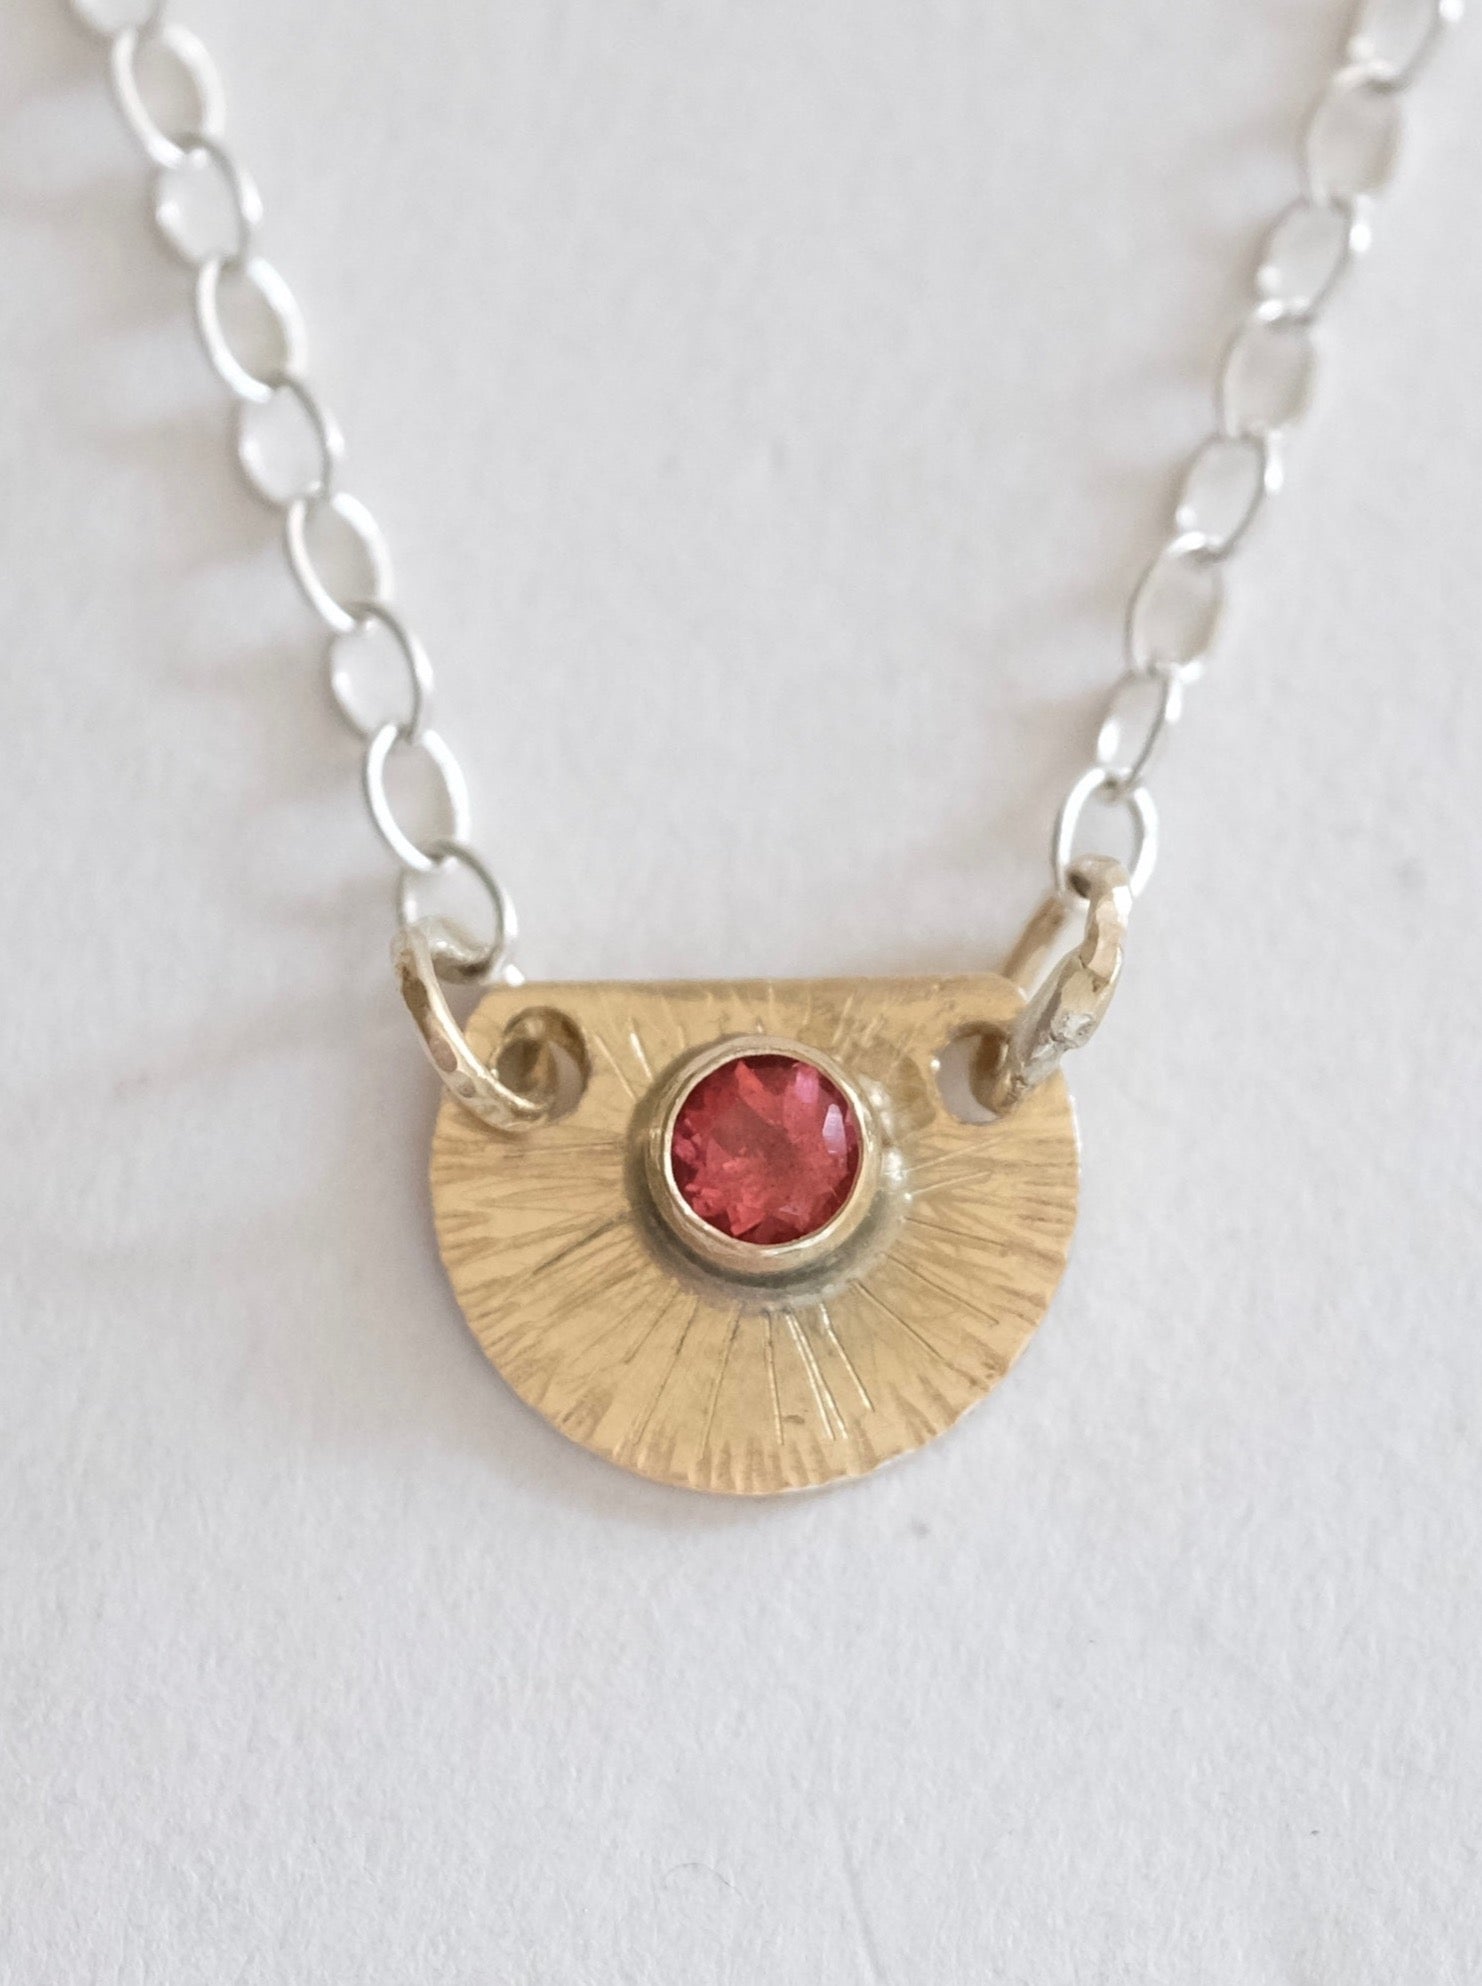 Pink Tourmaline Gold Pendant on Silver Chain